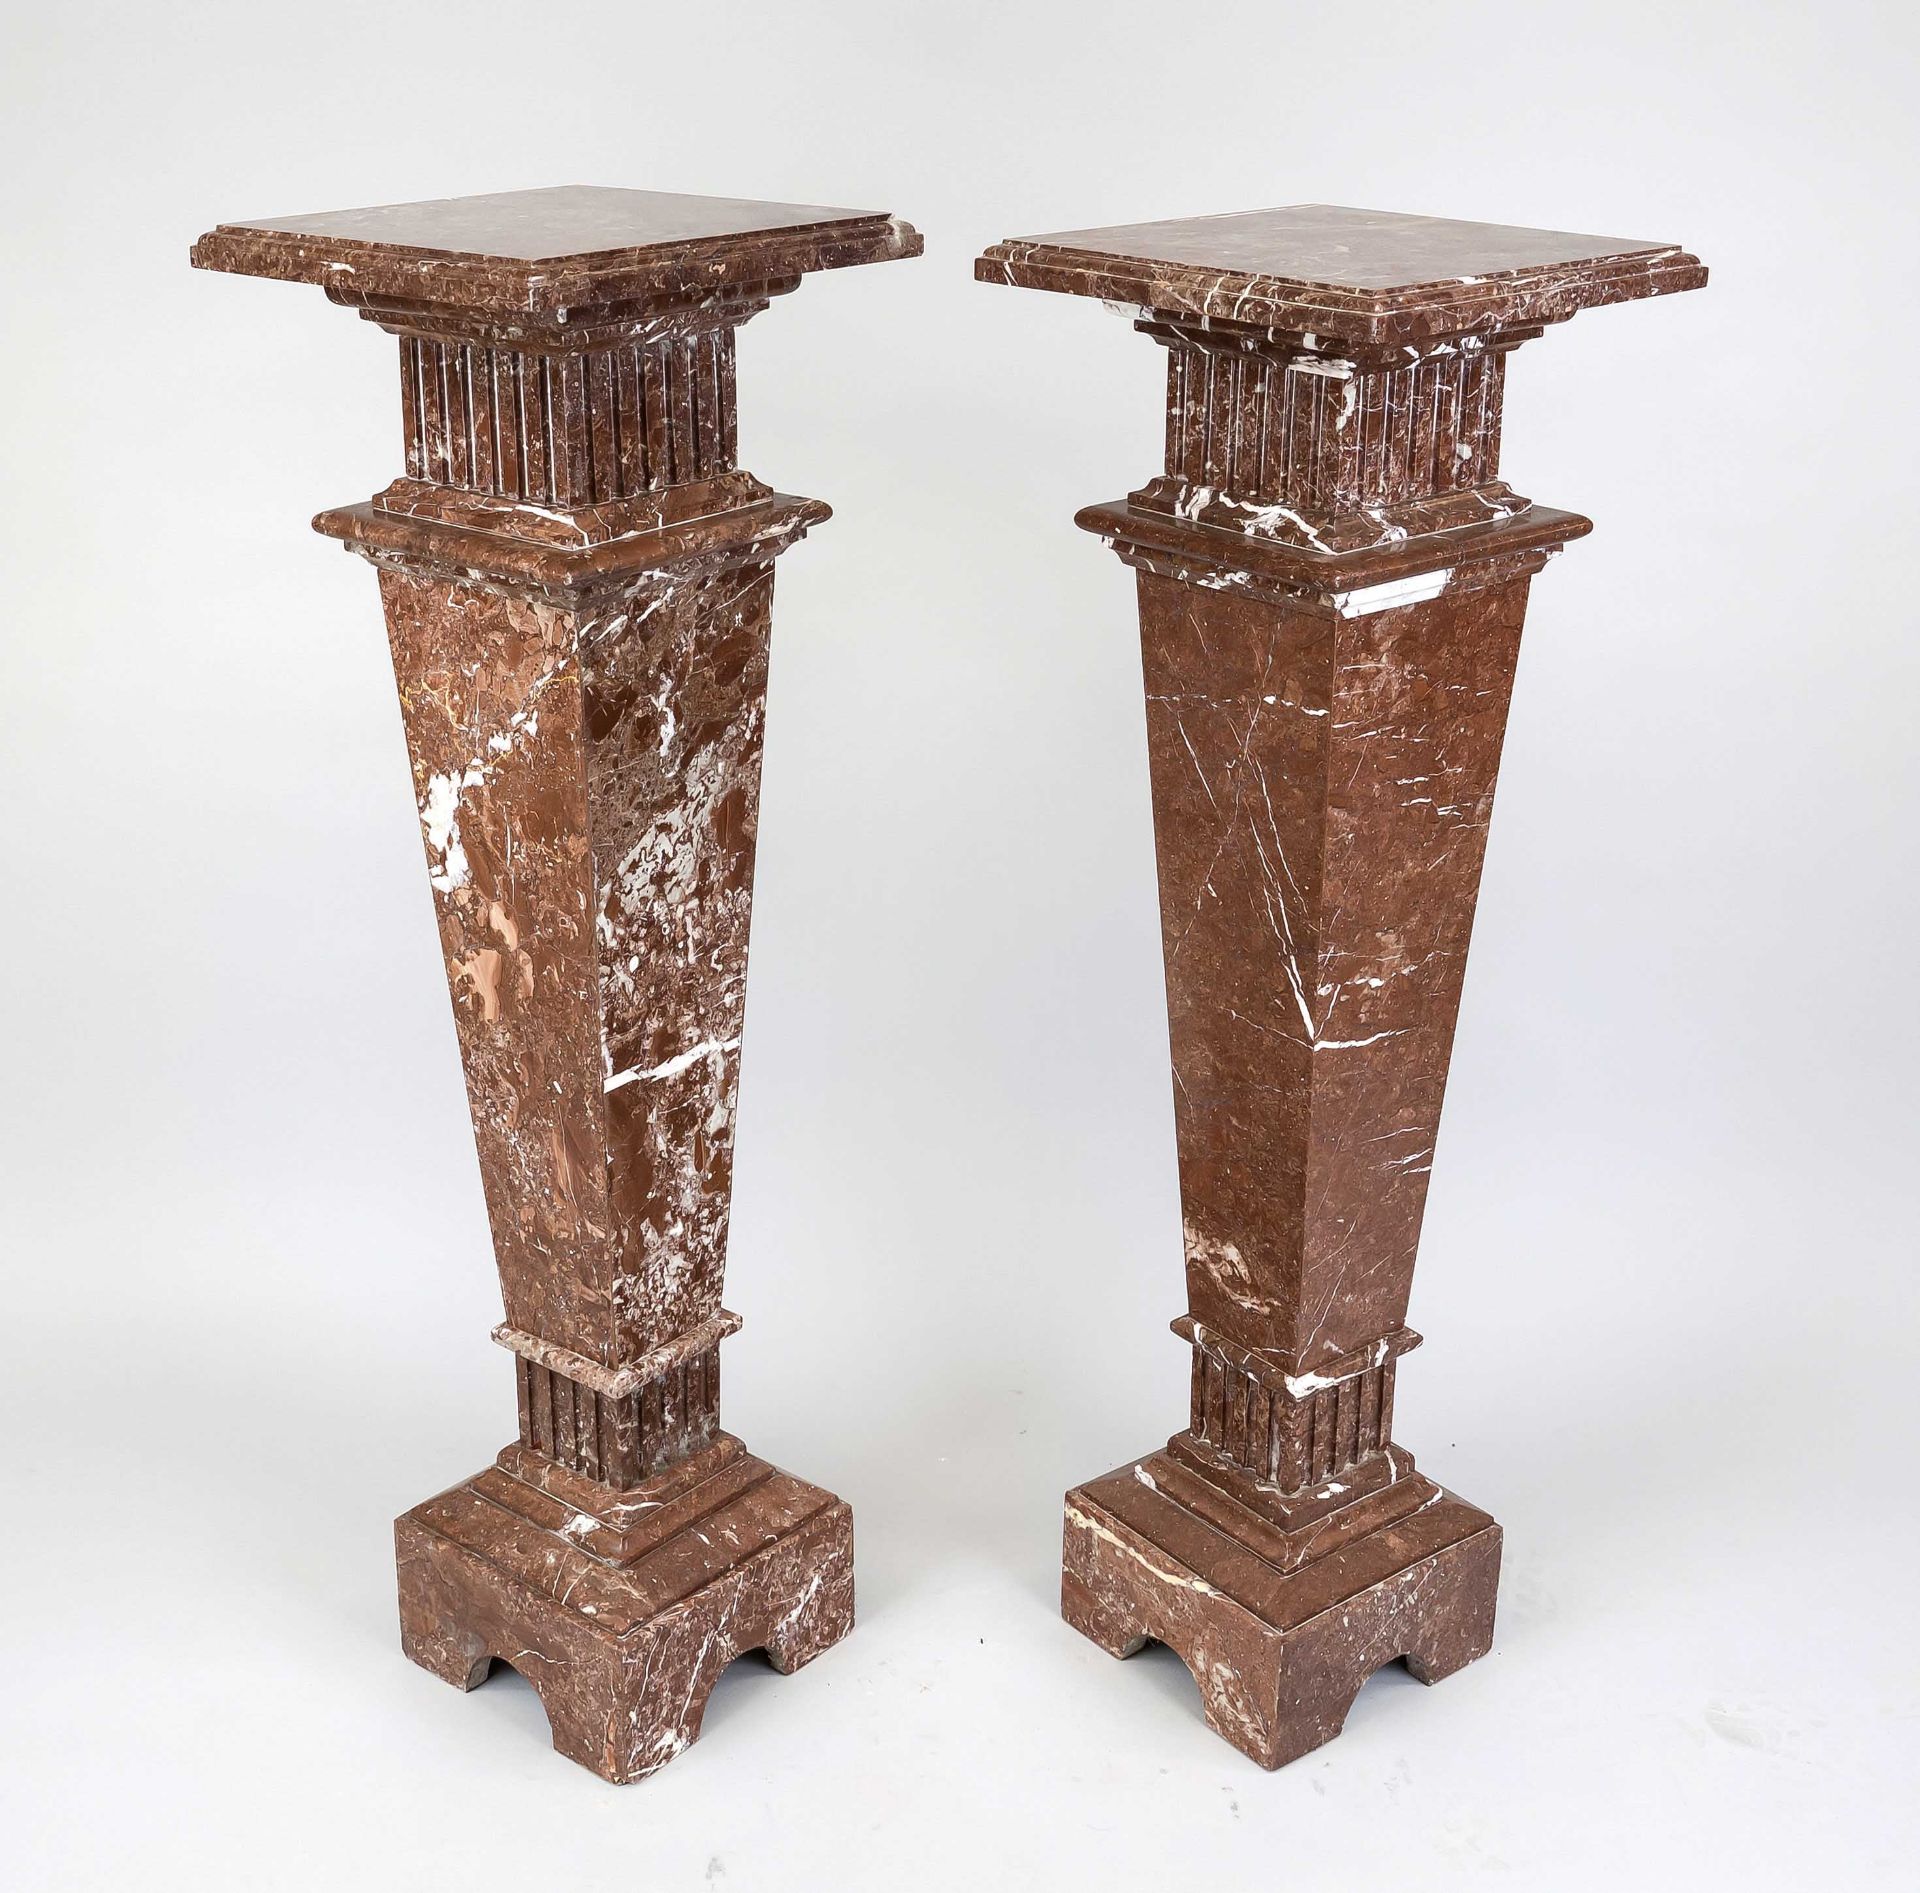 Pair of flower columns, 20th century, polished red stone with natural pattern, conical smooth